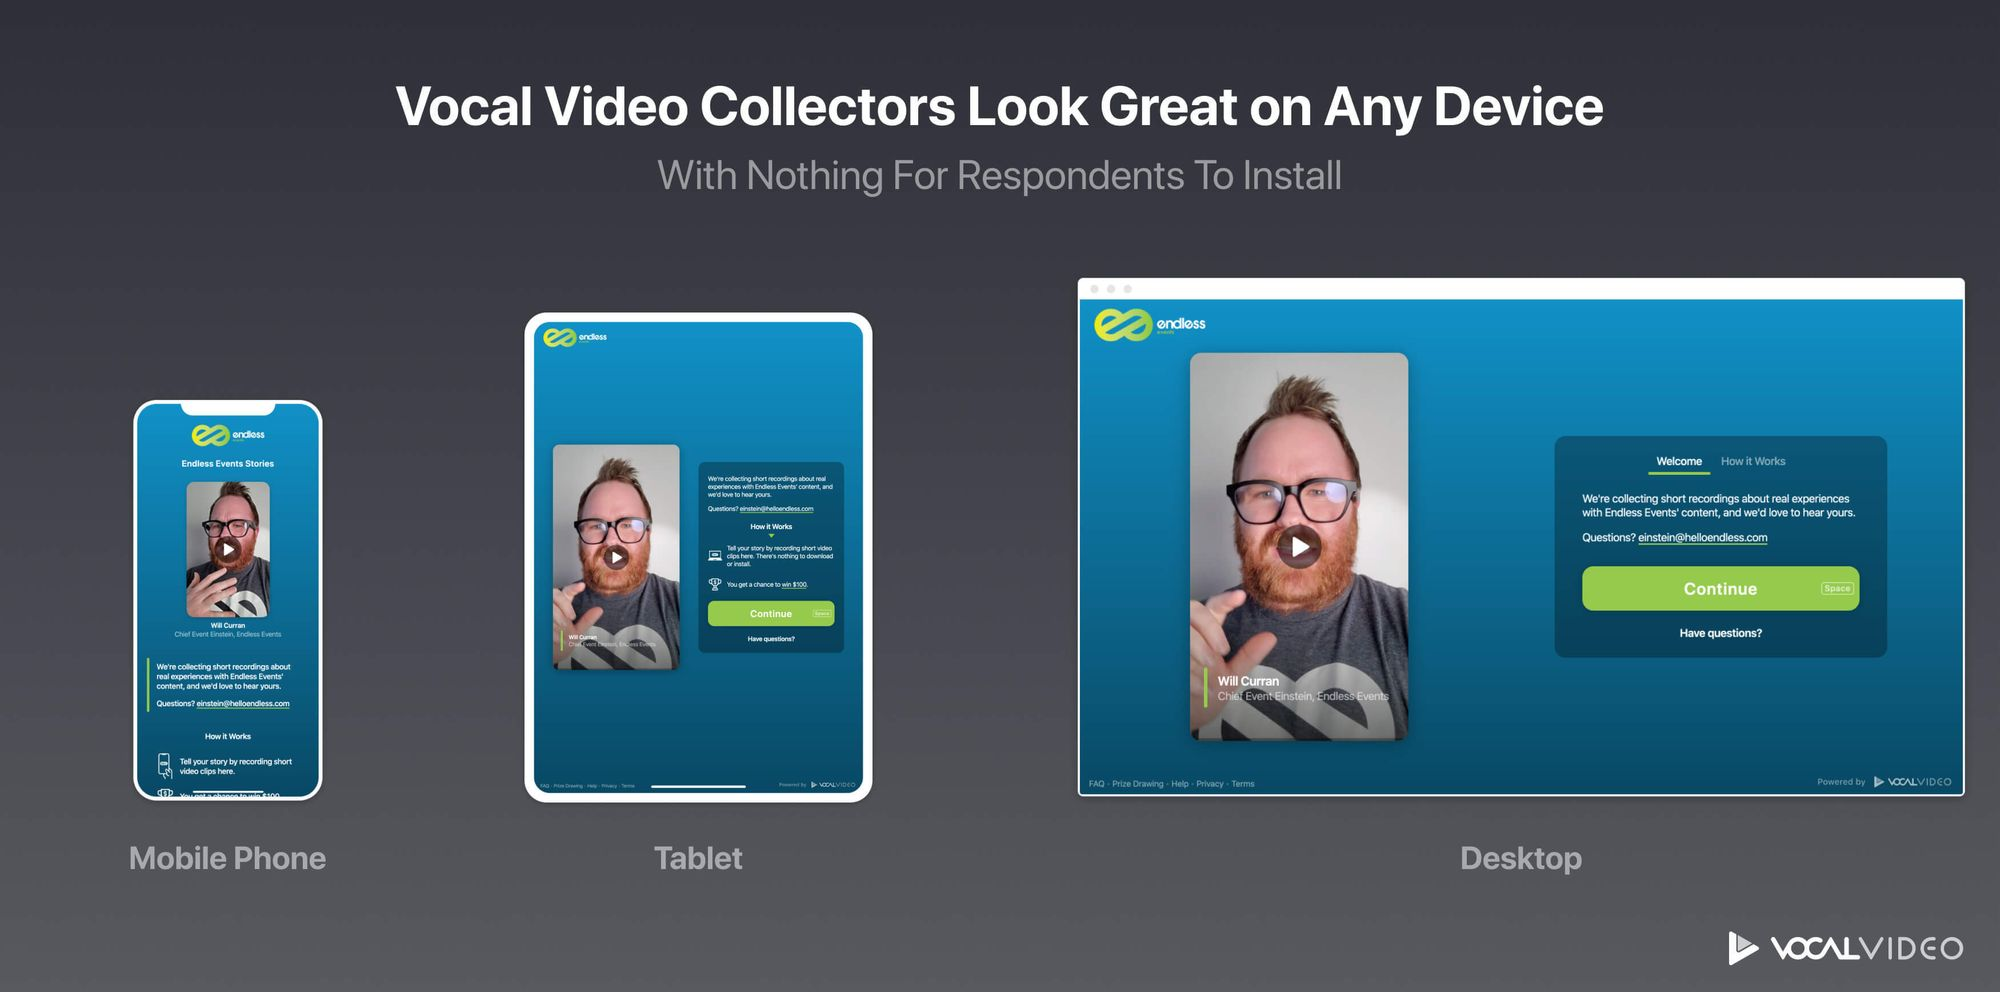 Video Collectors look great on any device: Mobile, Tablet, and Desktop